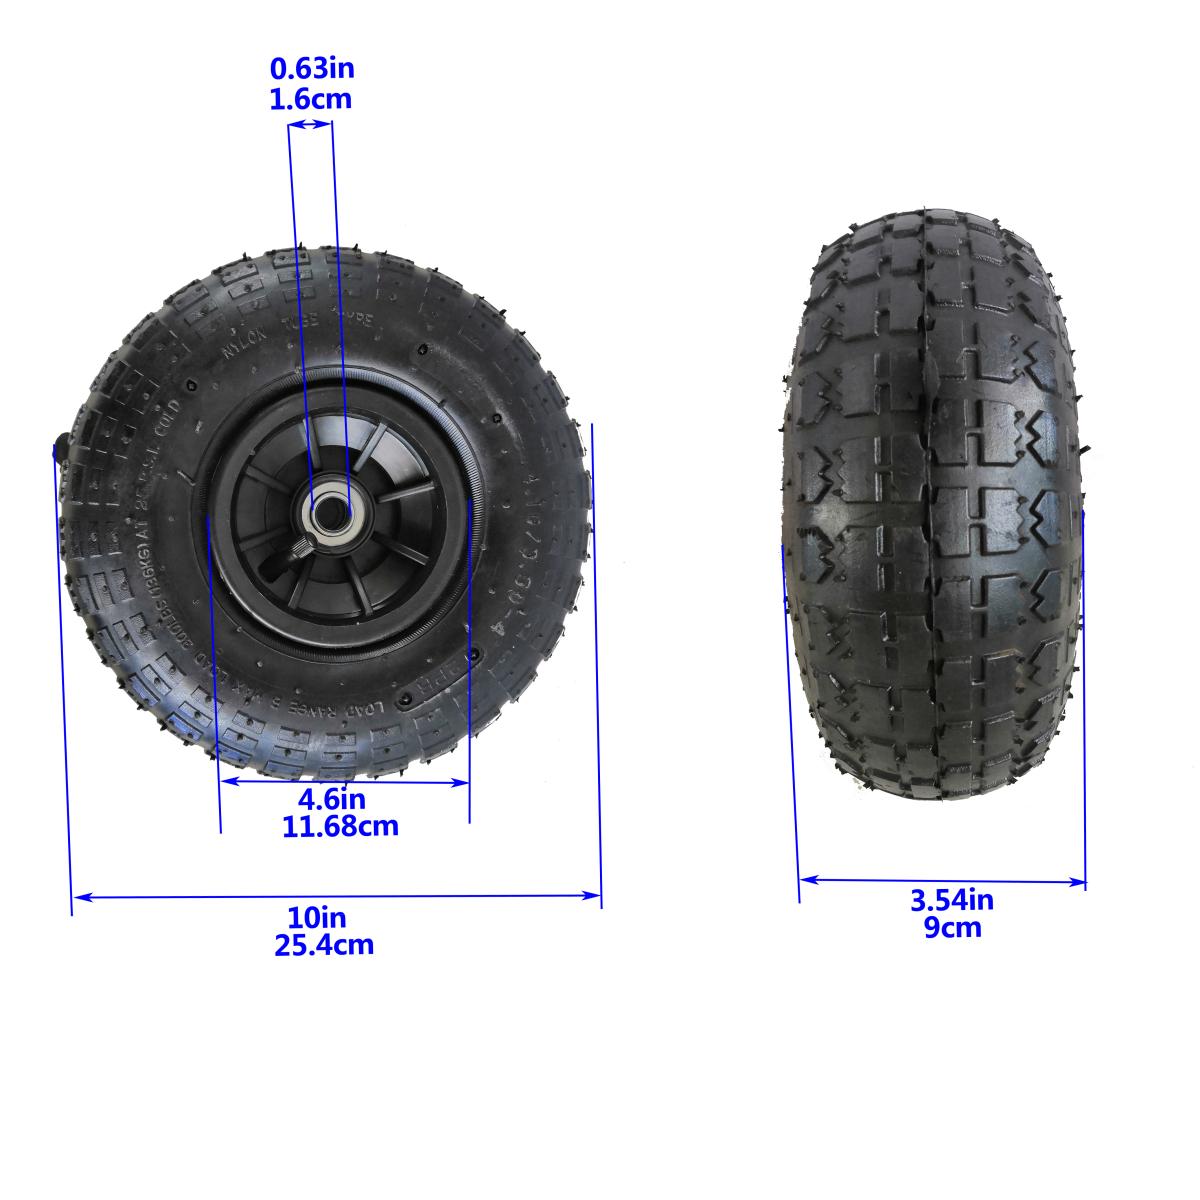 tires and inner tubes are made of heavy-duty rubber, and the hub are made of high-quality plastic. Air wheels